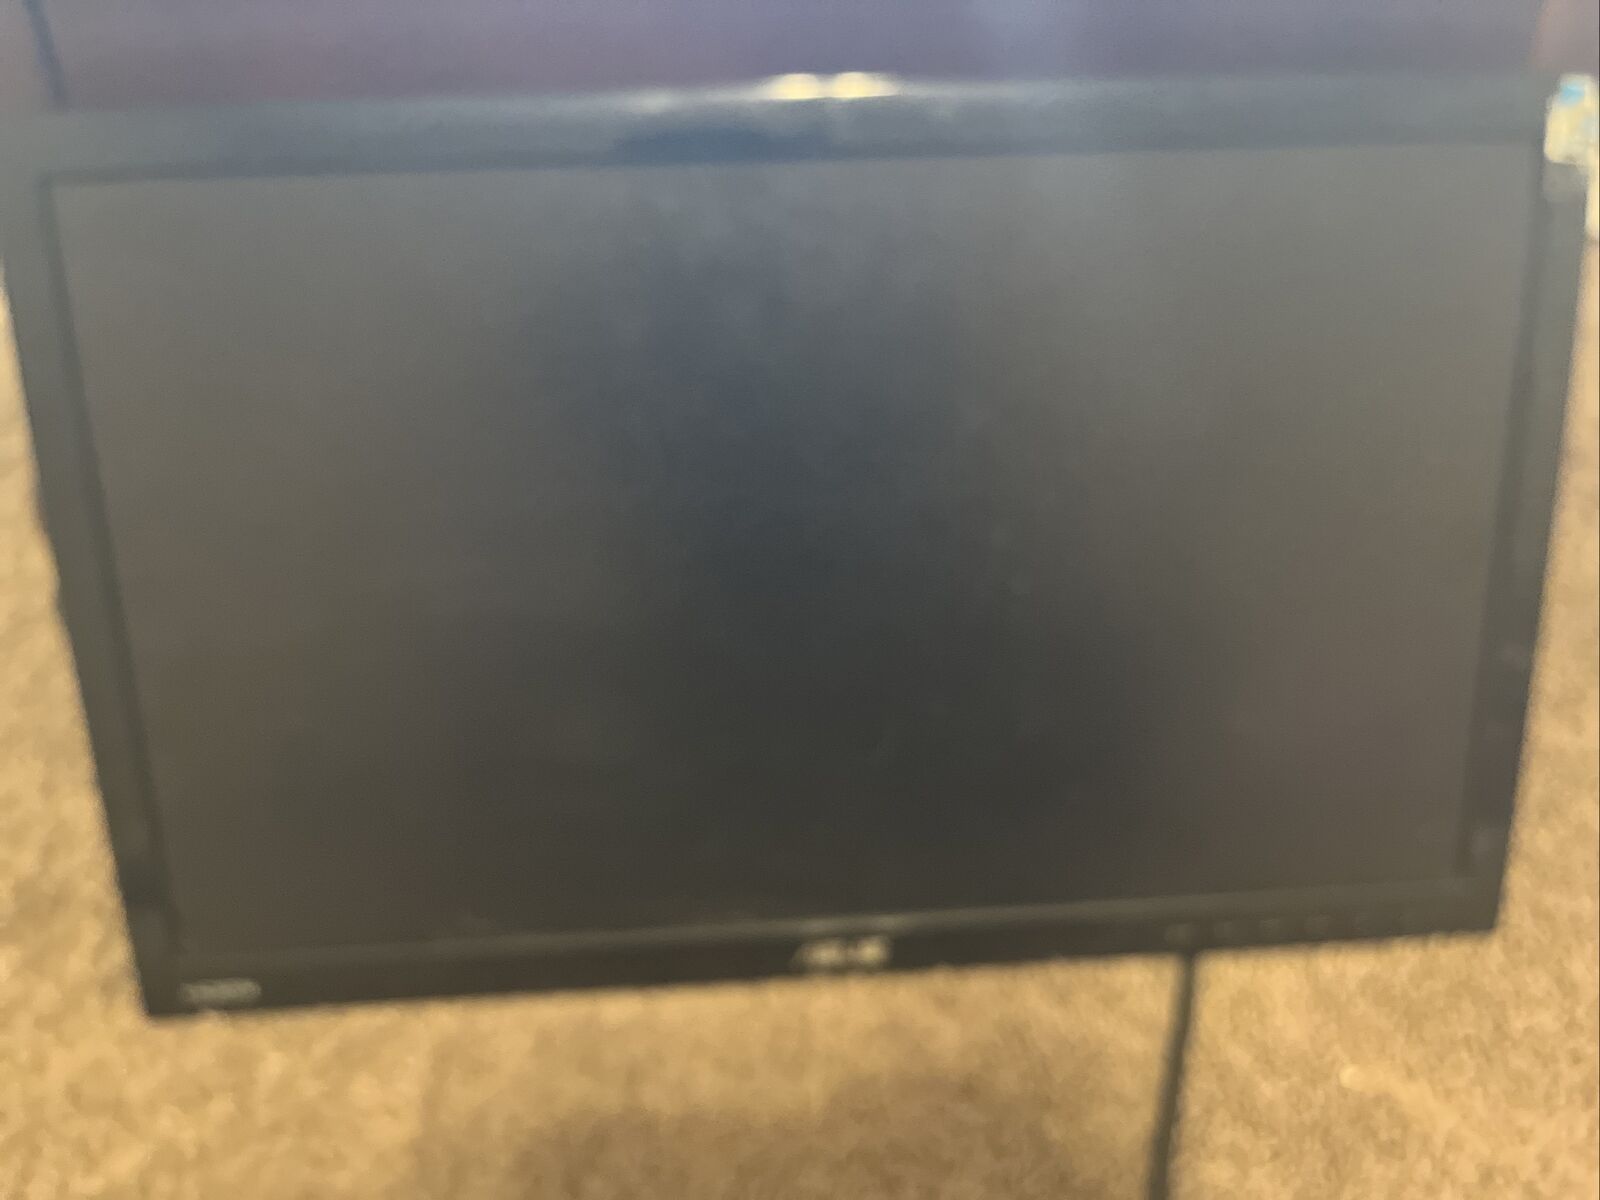 ASUS MB MB168B 15.6 inch Widescreen LED LCD Monitor